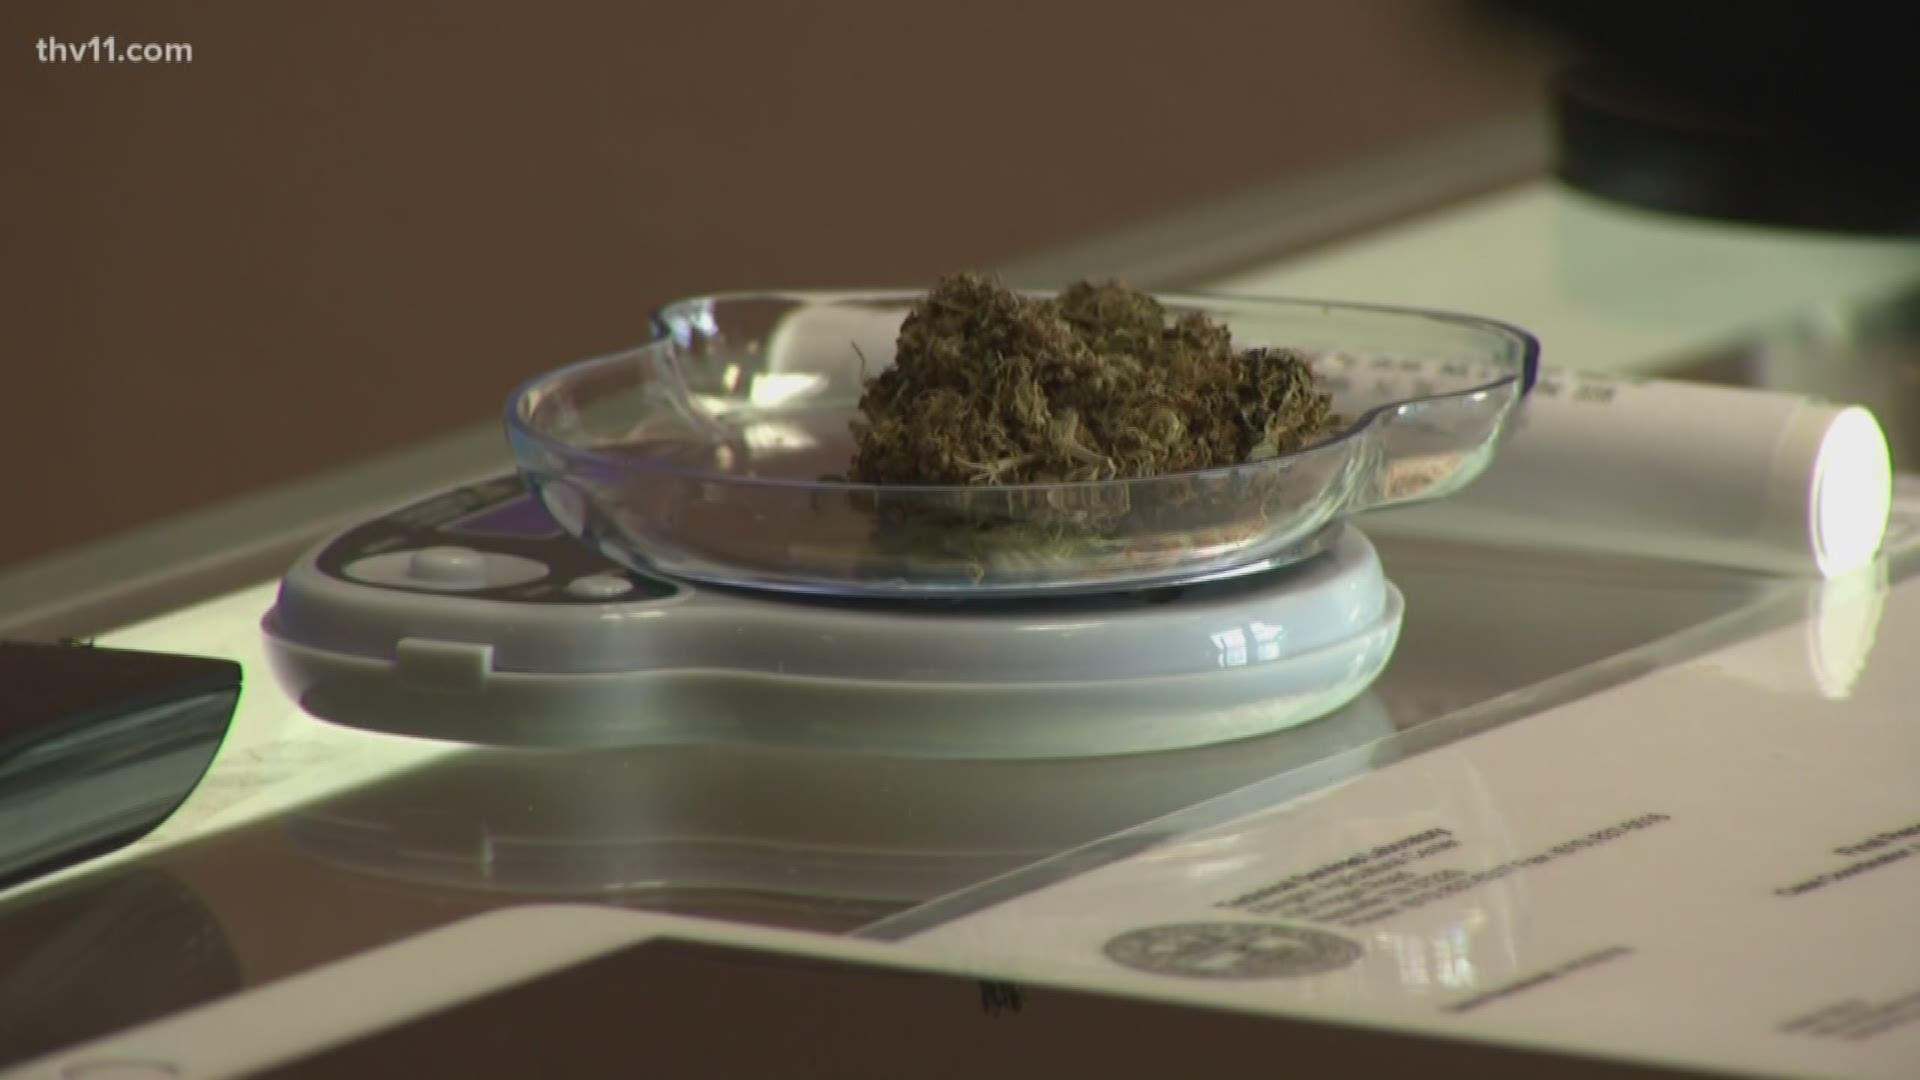 Almost two years after Arkansas voters approved medical marijuana, the process to make it available continues.